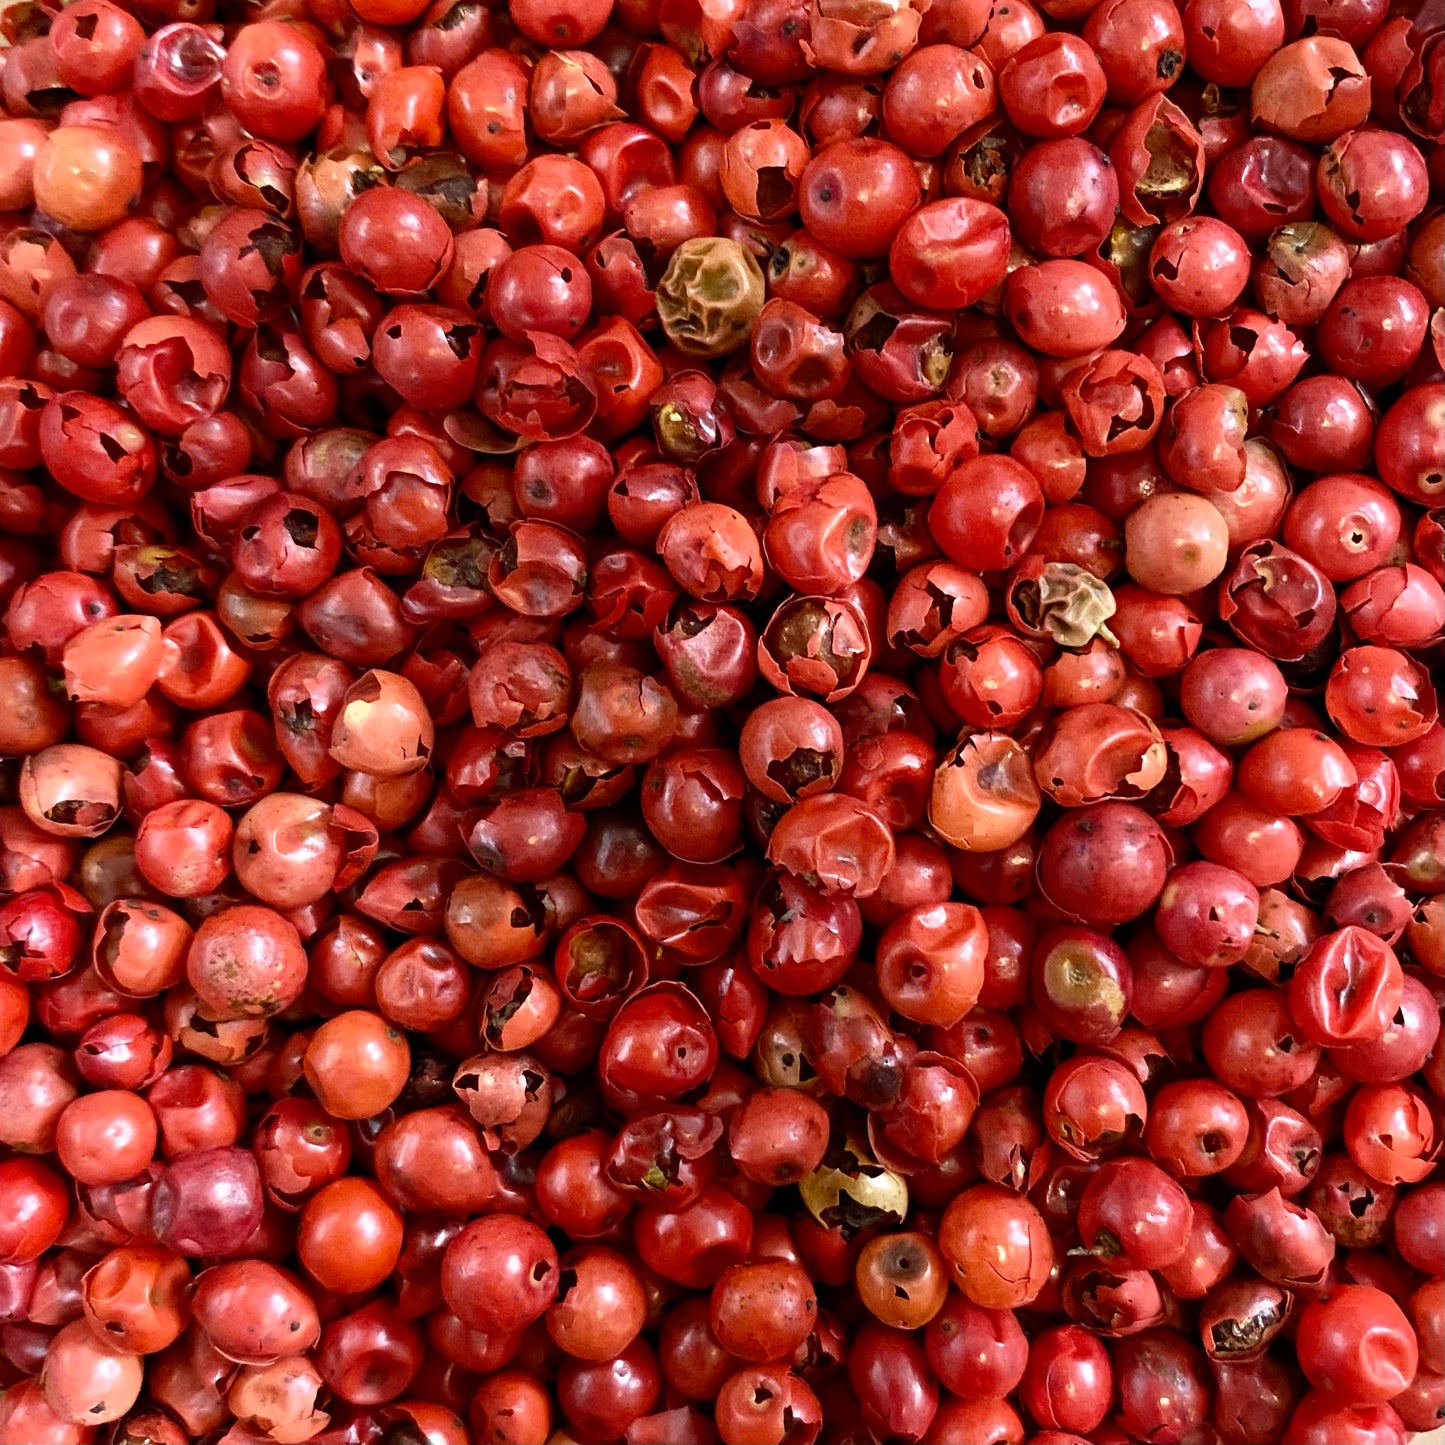 Spices: Pink Peppercorns